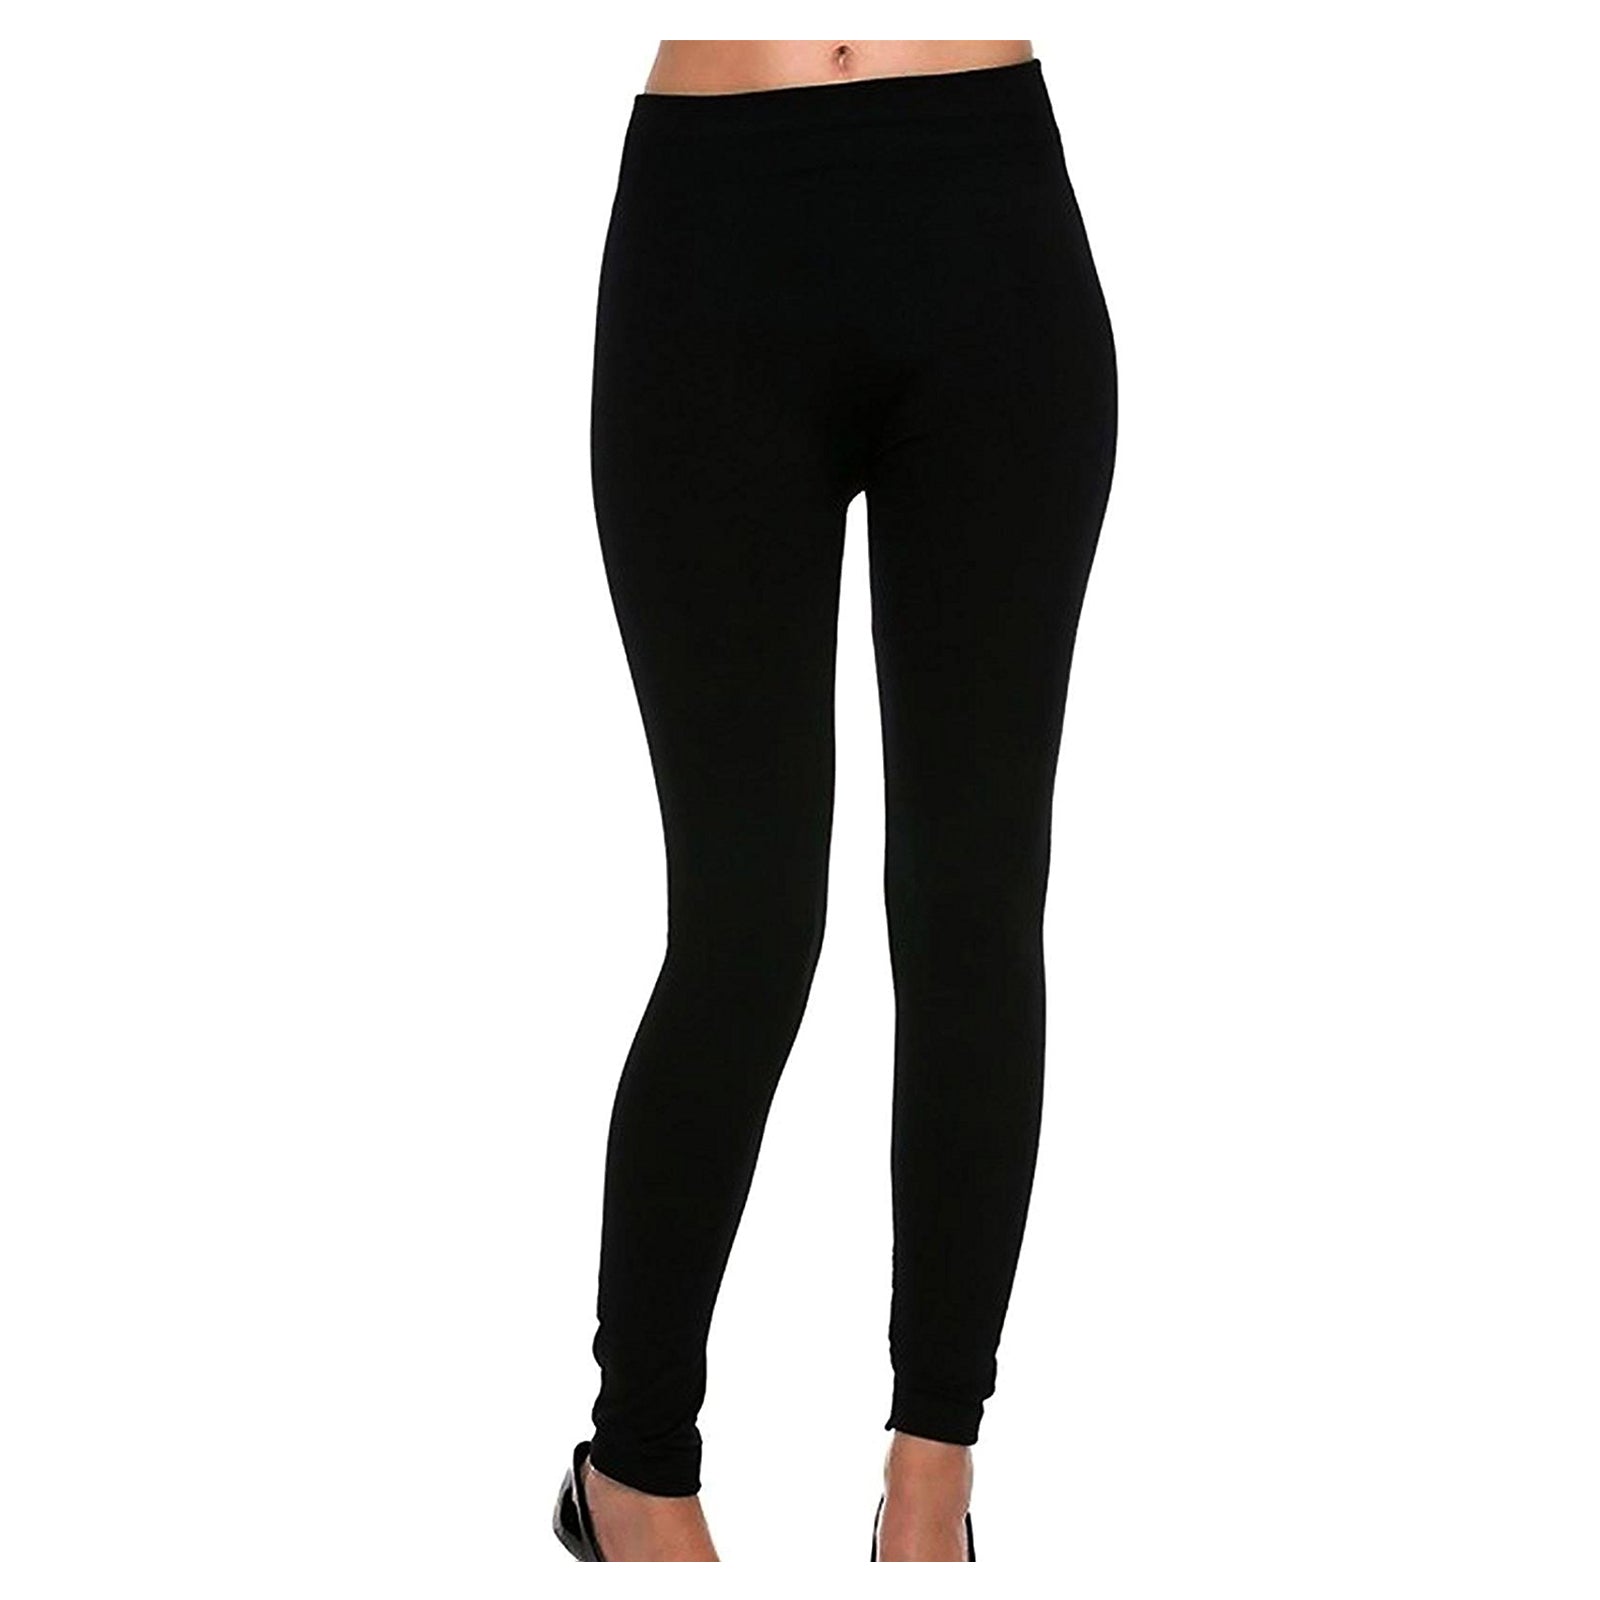 Heatwave® Pack Of 3 Ladies Black Thermal Tights For Women Heat Insulating.  Buy Now For £11.00.